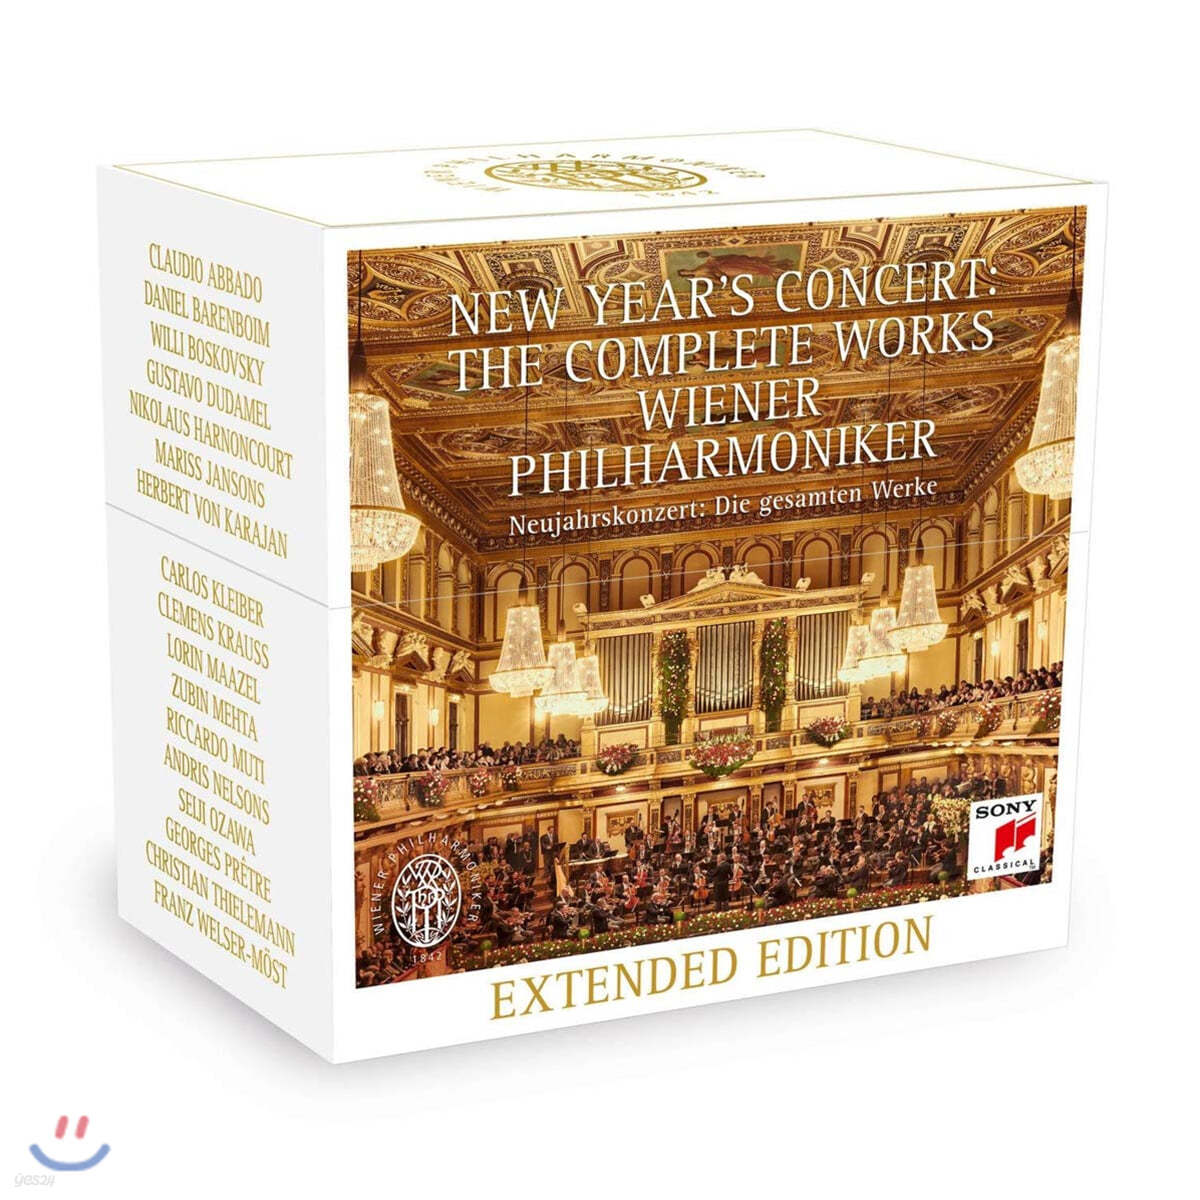 Wiener Philharmoniker 신년 음악회 (New Year's Concert: The Complete Works) 